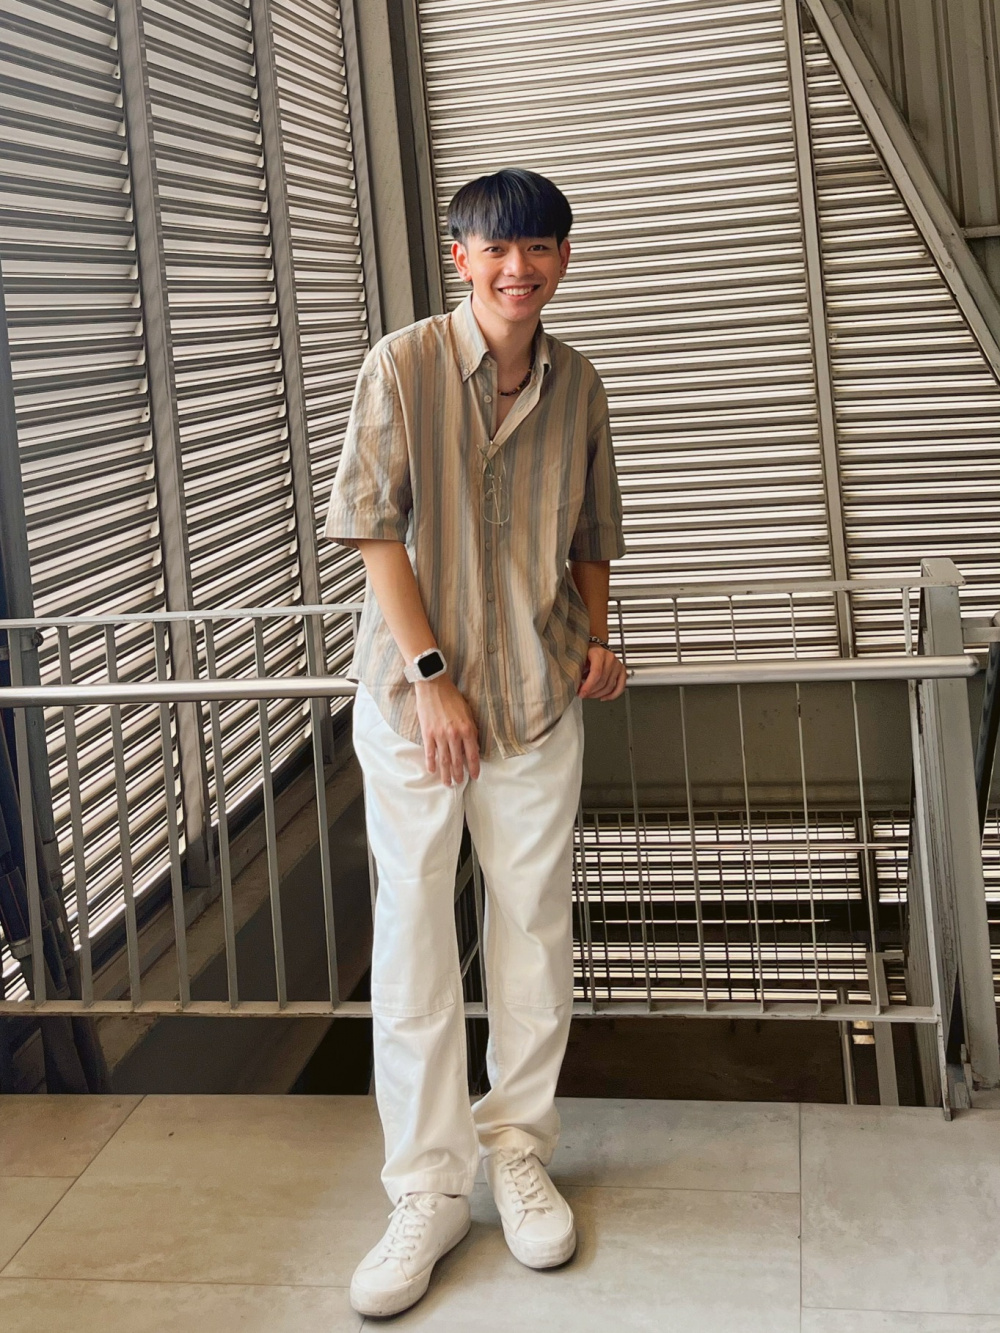 Check styling ideas for「Oxford Striped Short Sleeve Pull Over Shirt、Painter  Pants」